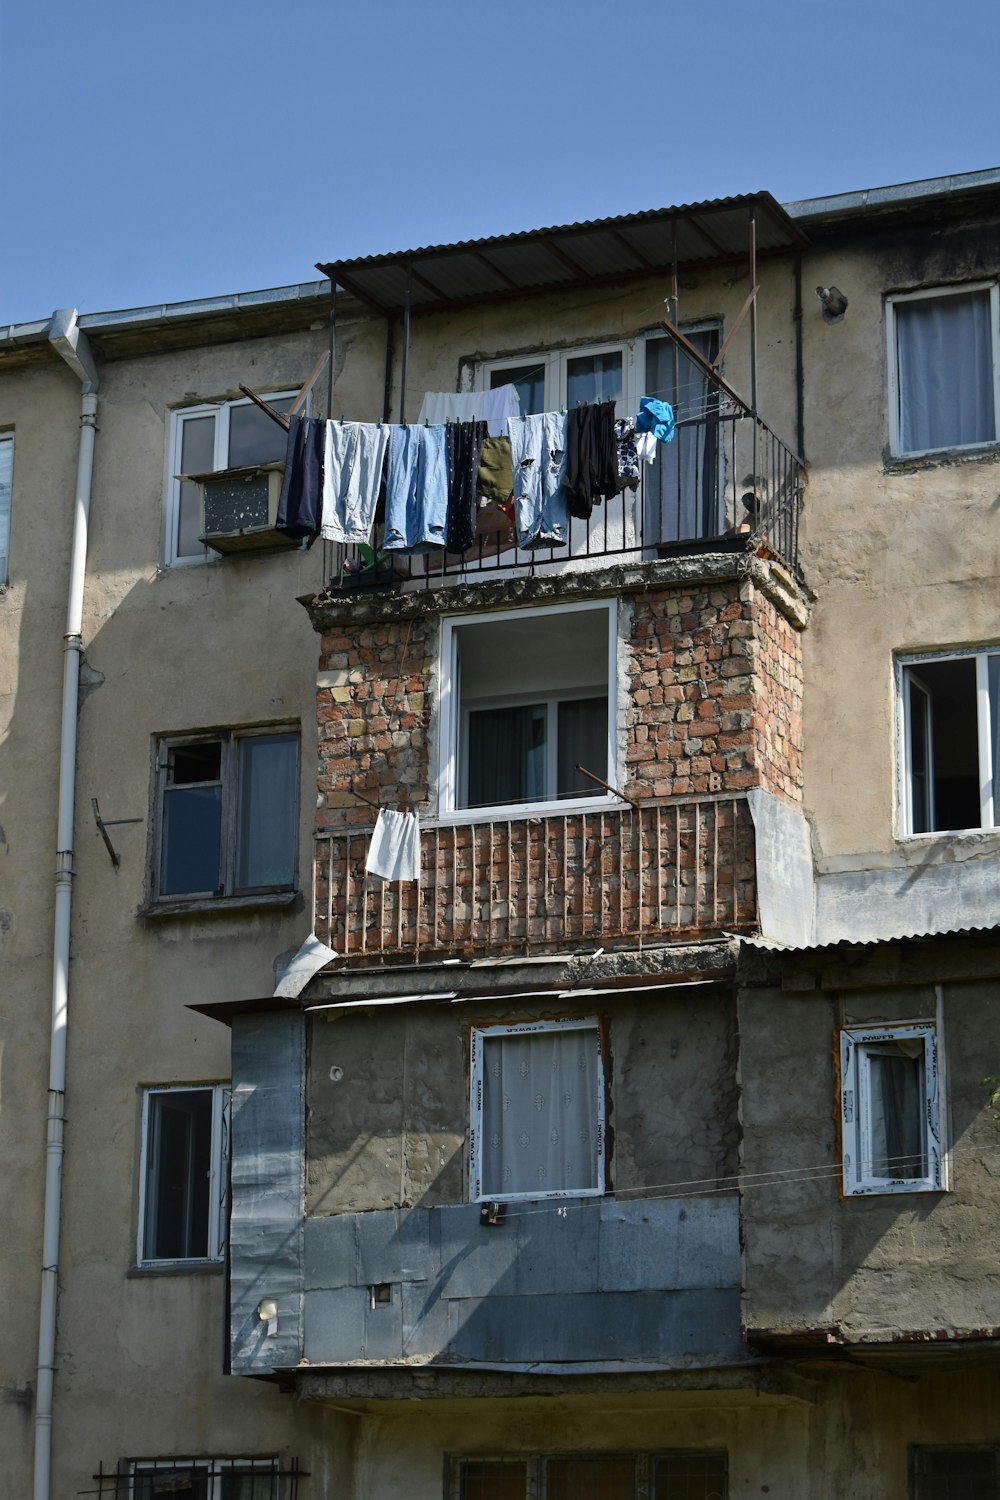 an apartment building with clothes hanging out to dry